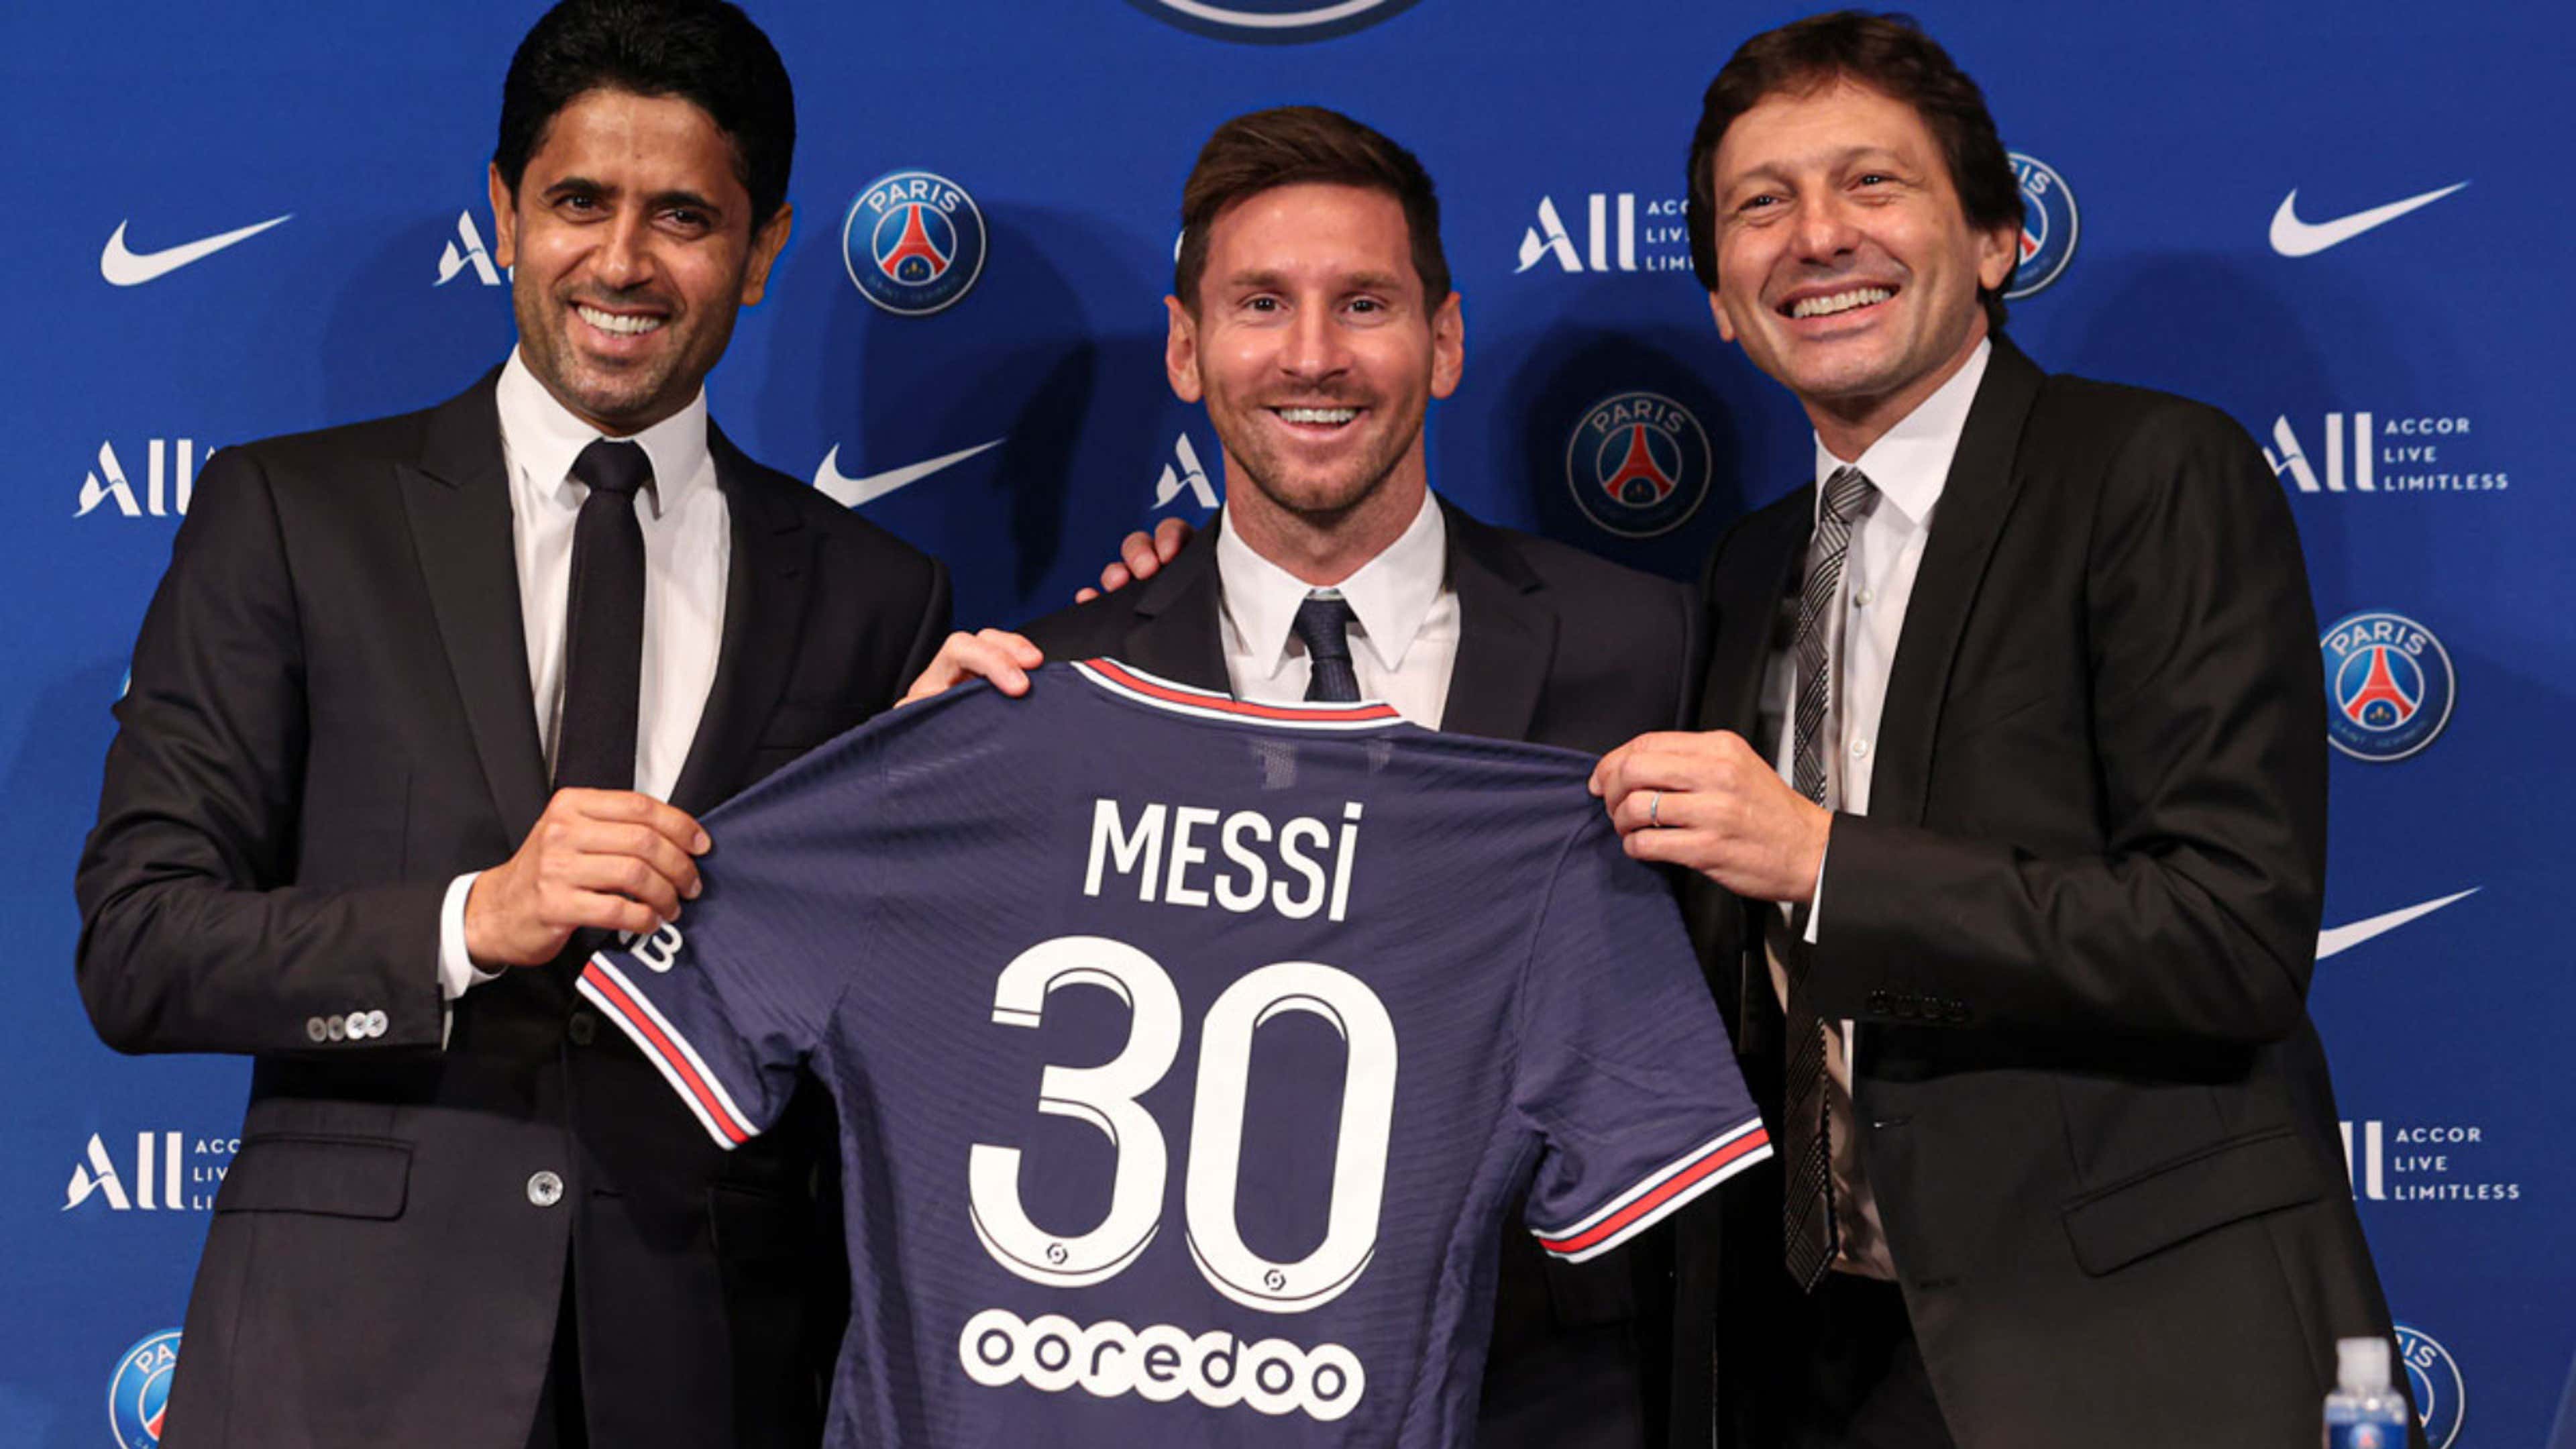 Why Does Messi Wear No 30 At Psg